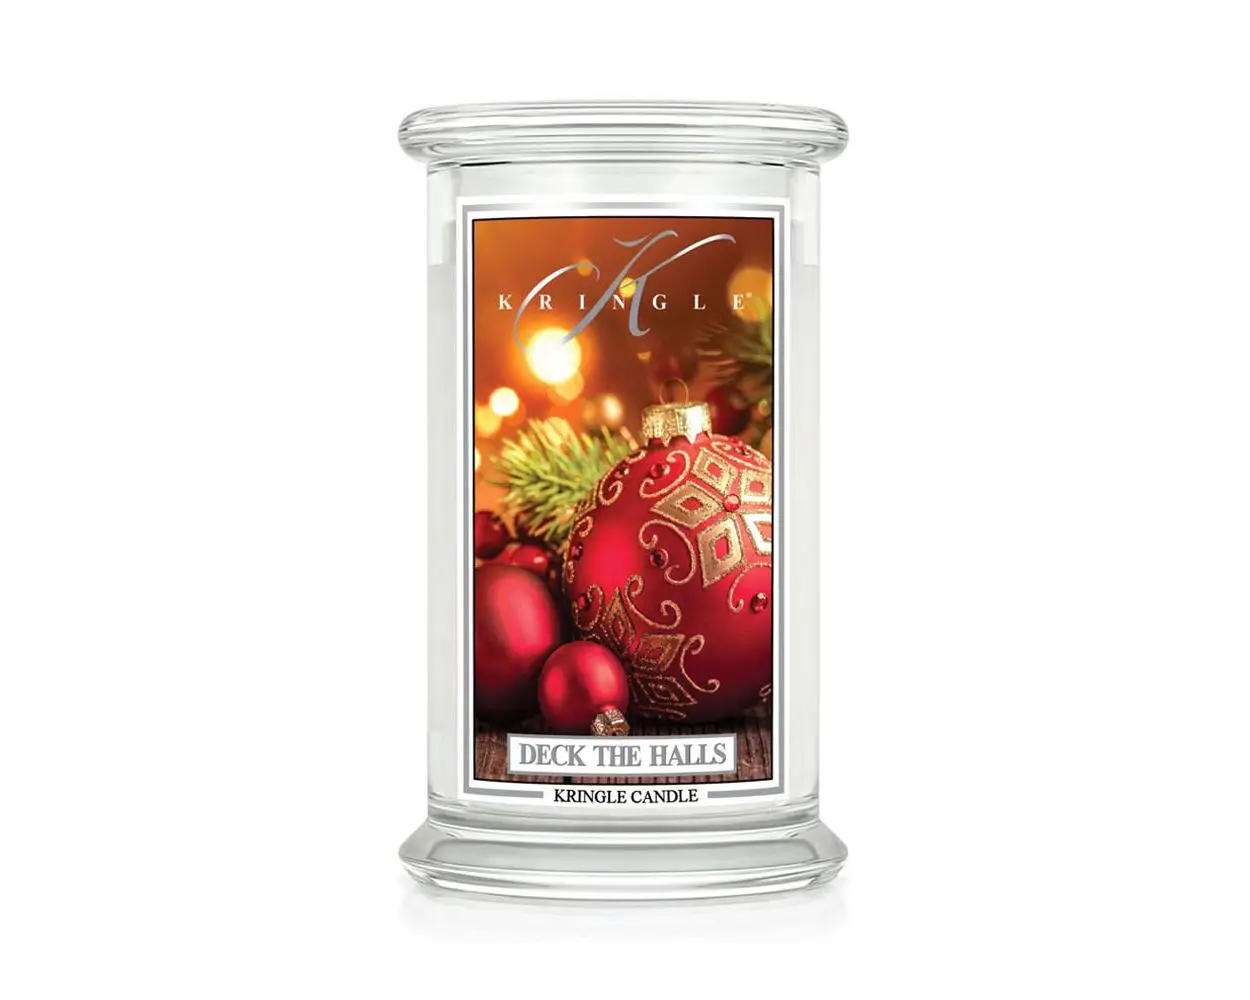 Classic Halls Deck Gro脽e Candle The